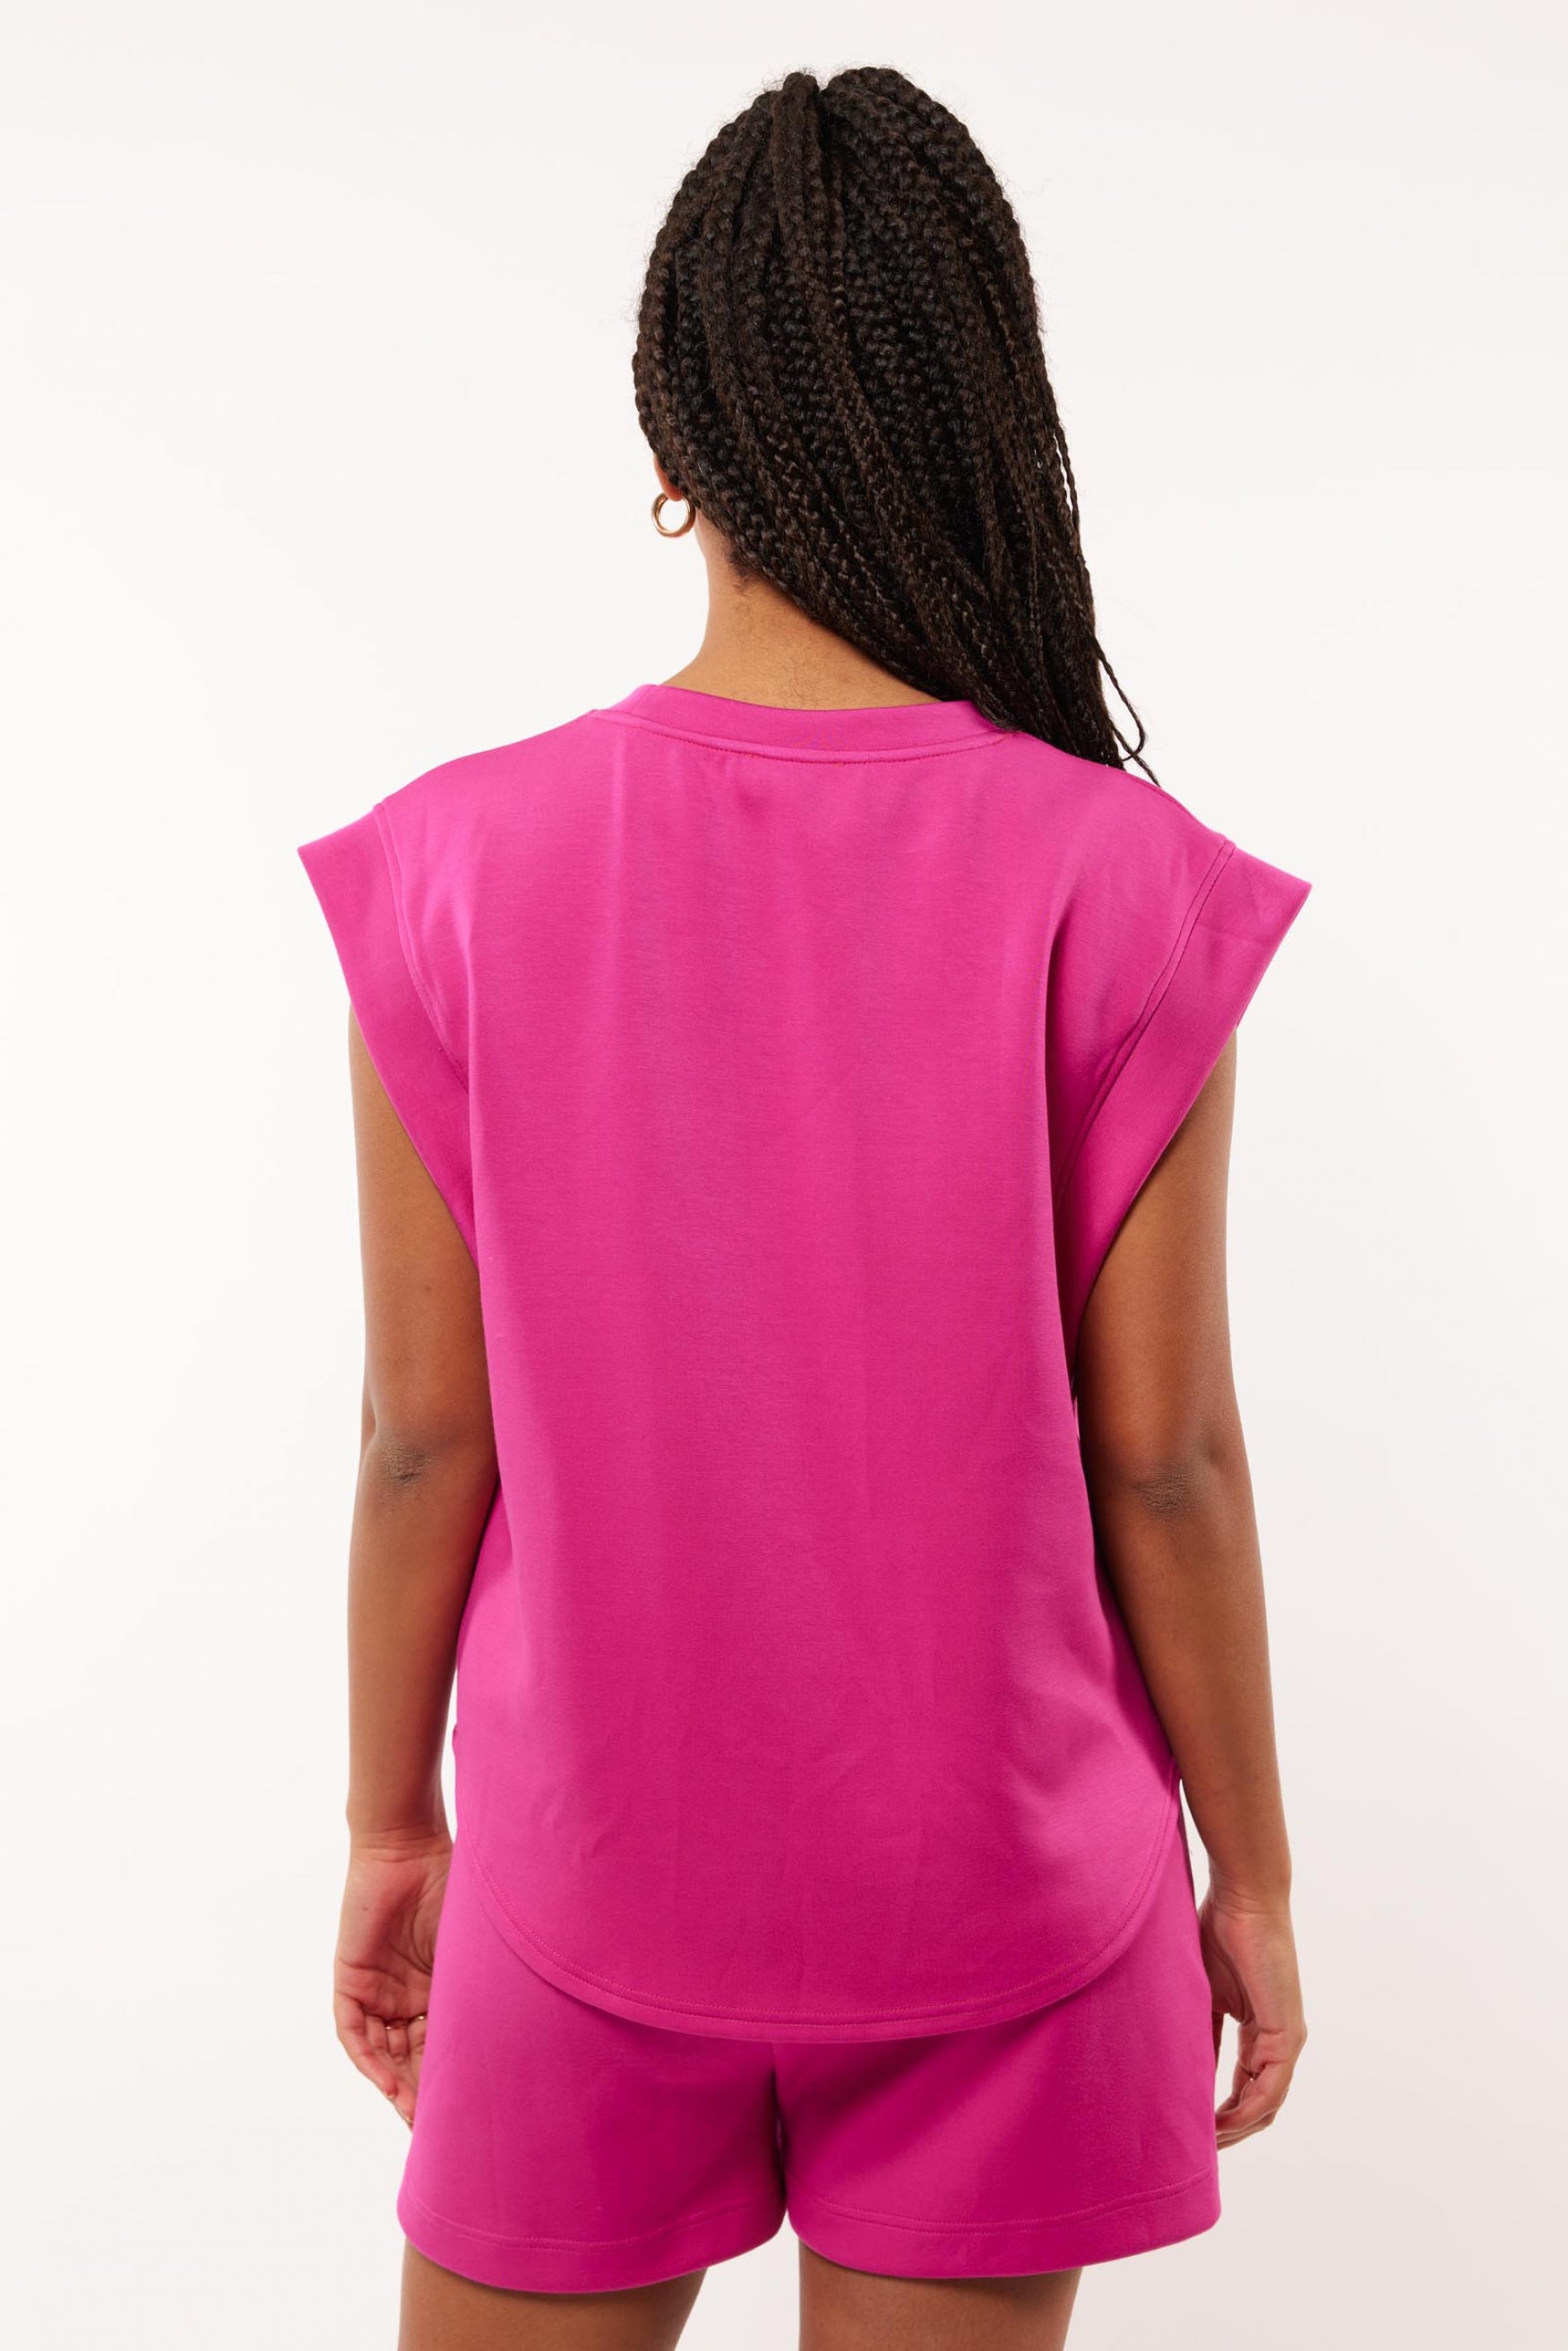 Lucile top | Bright Pink